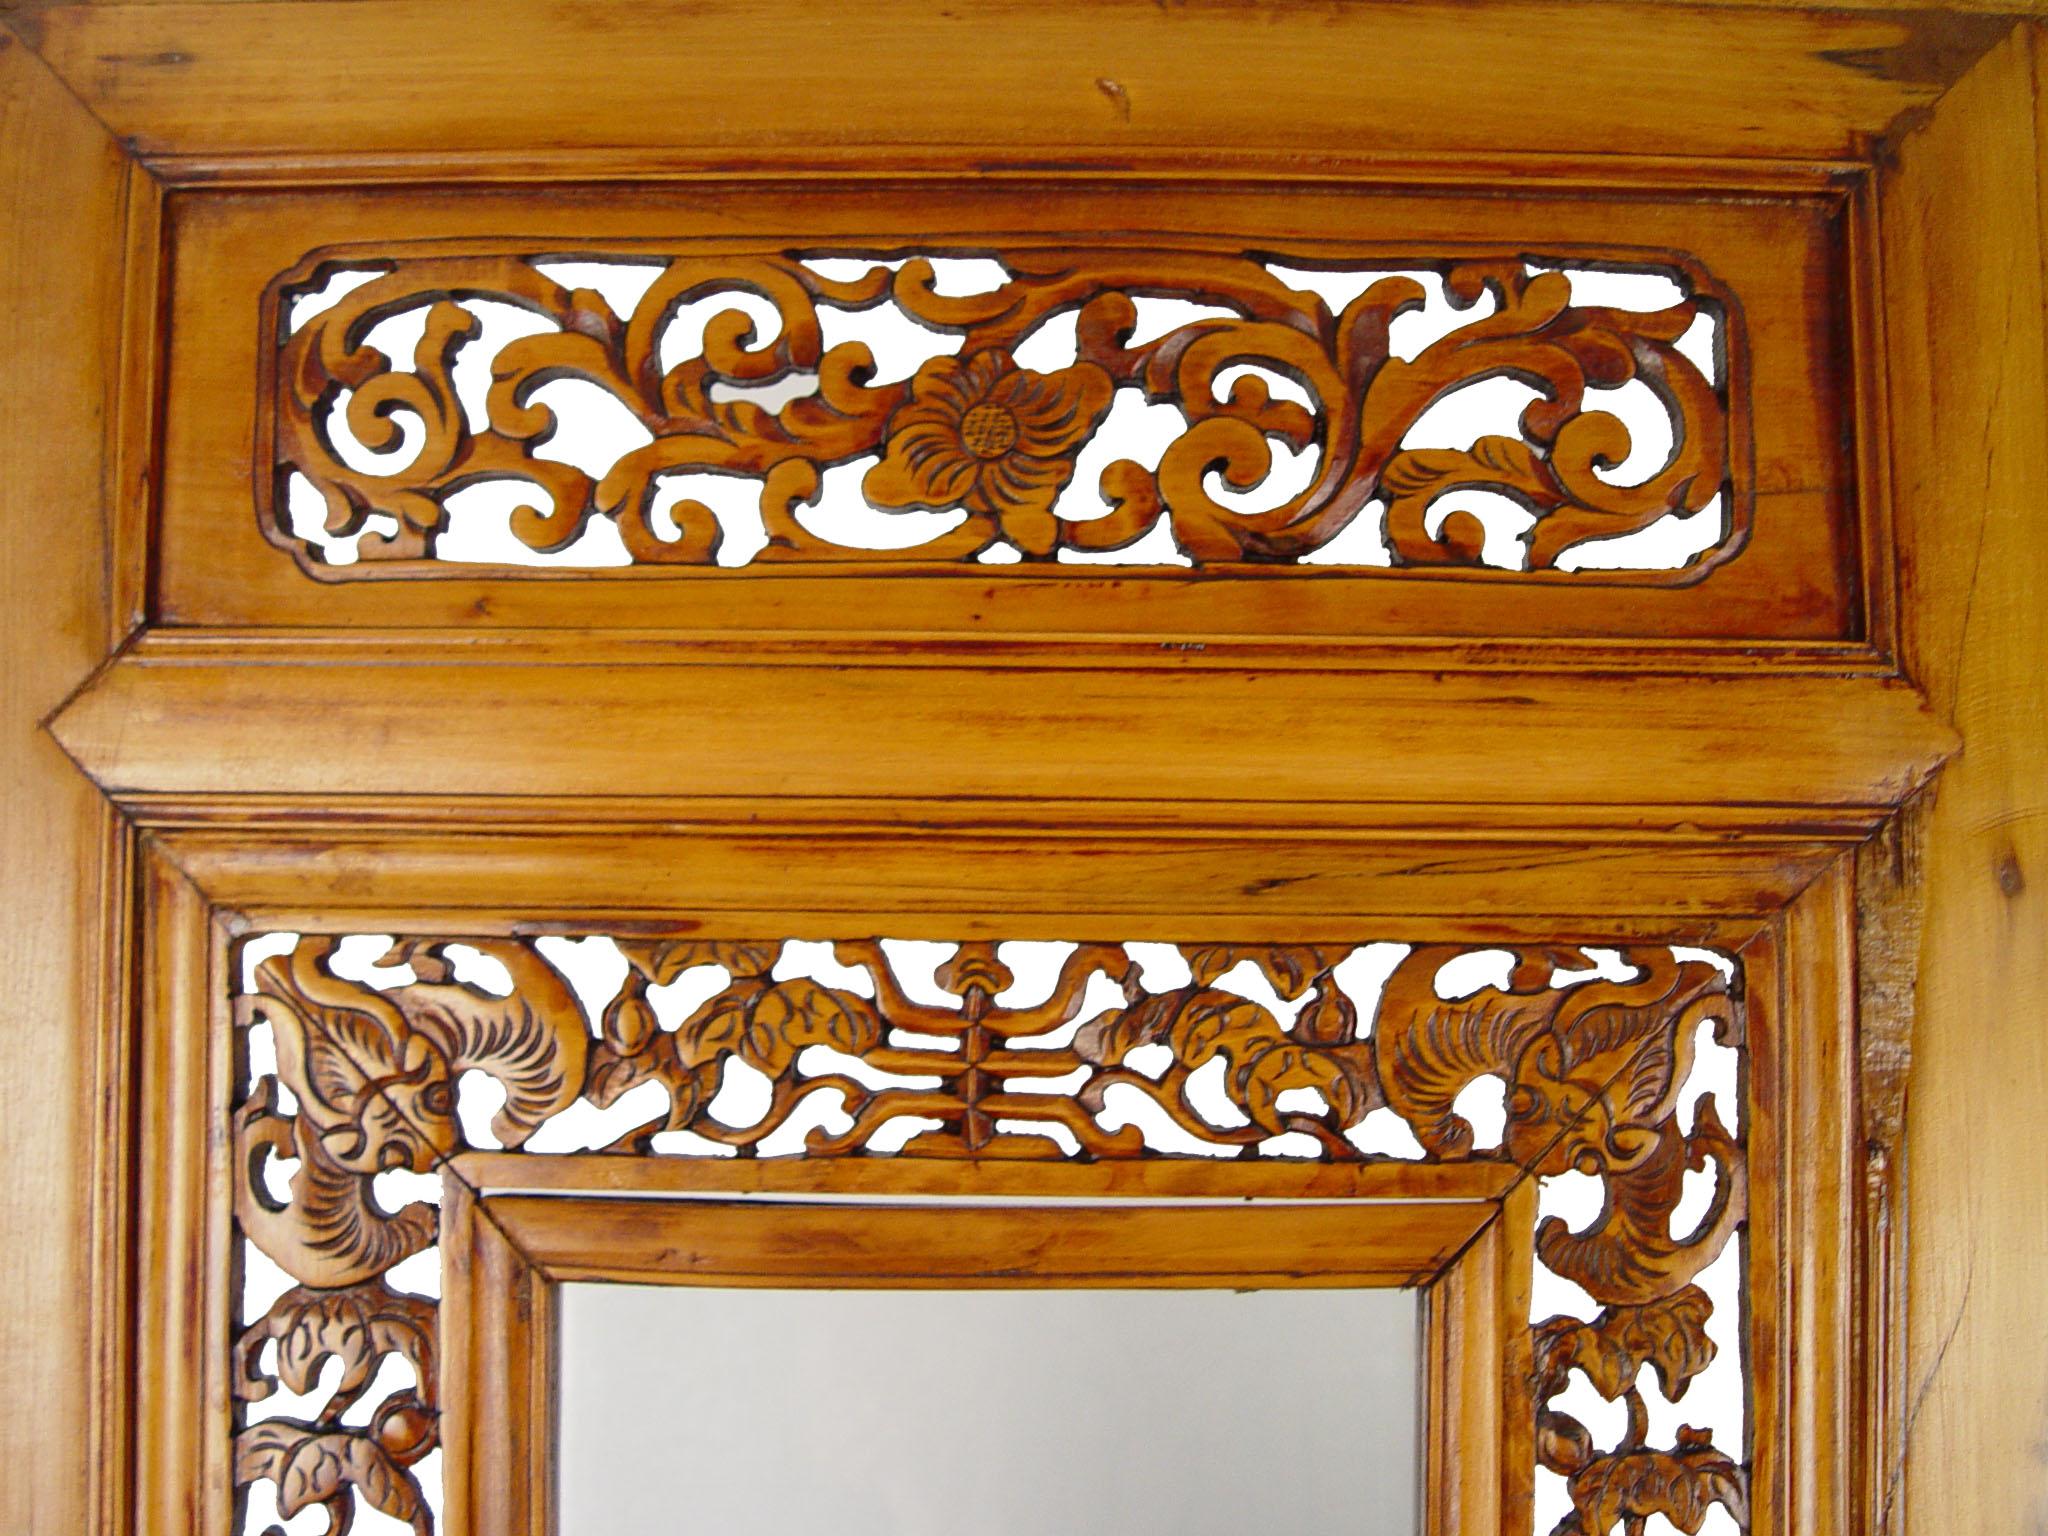 Early 20th Century Chinese Antique Open Carved Screen / Room Divider In Good Condition For Sale In Pomona, CA